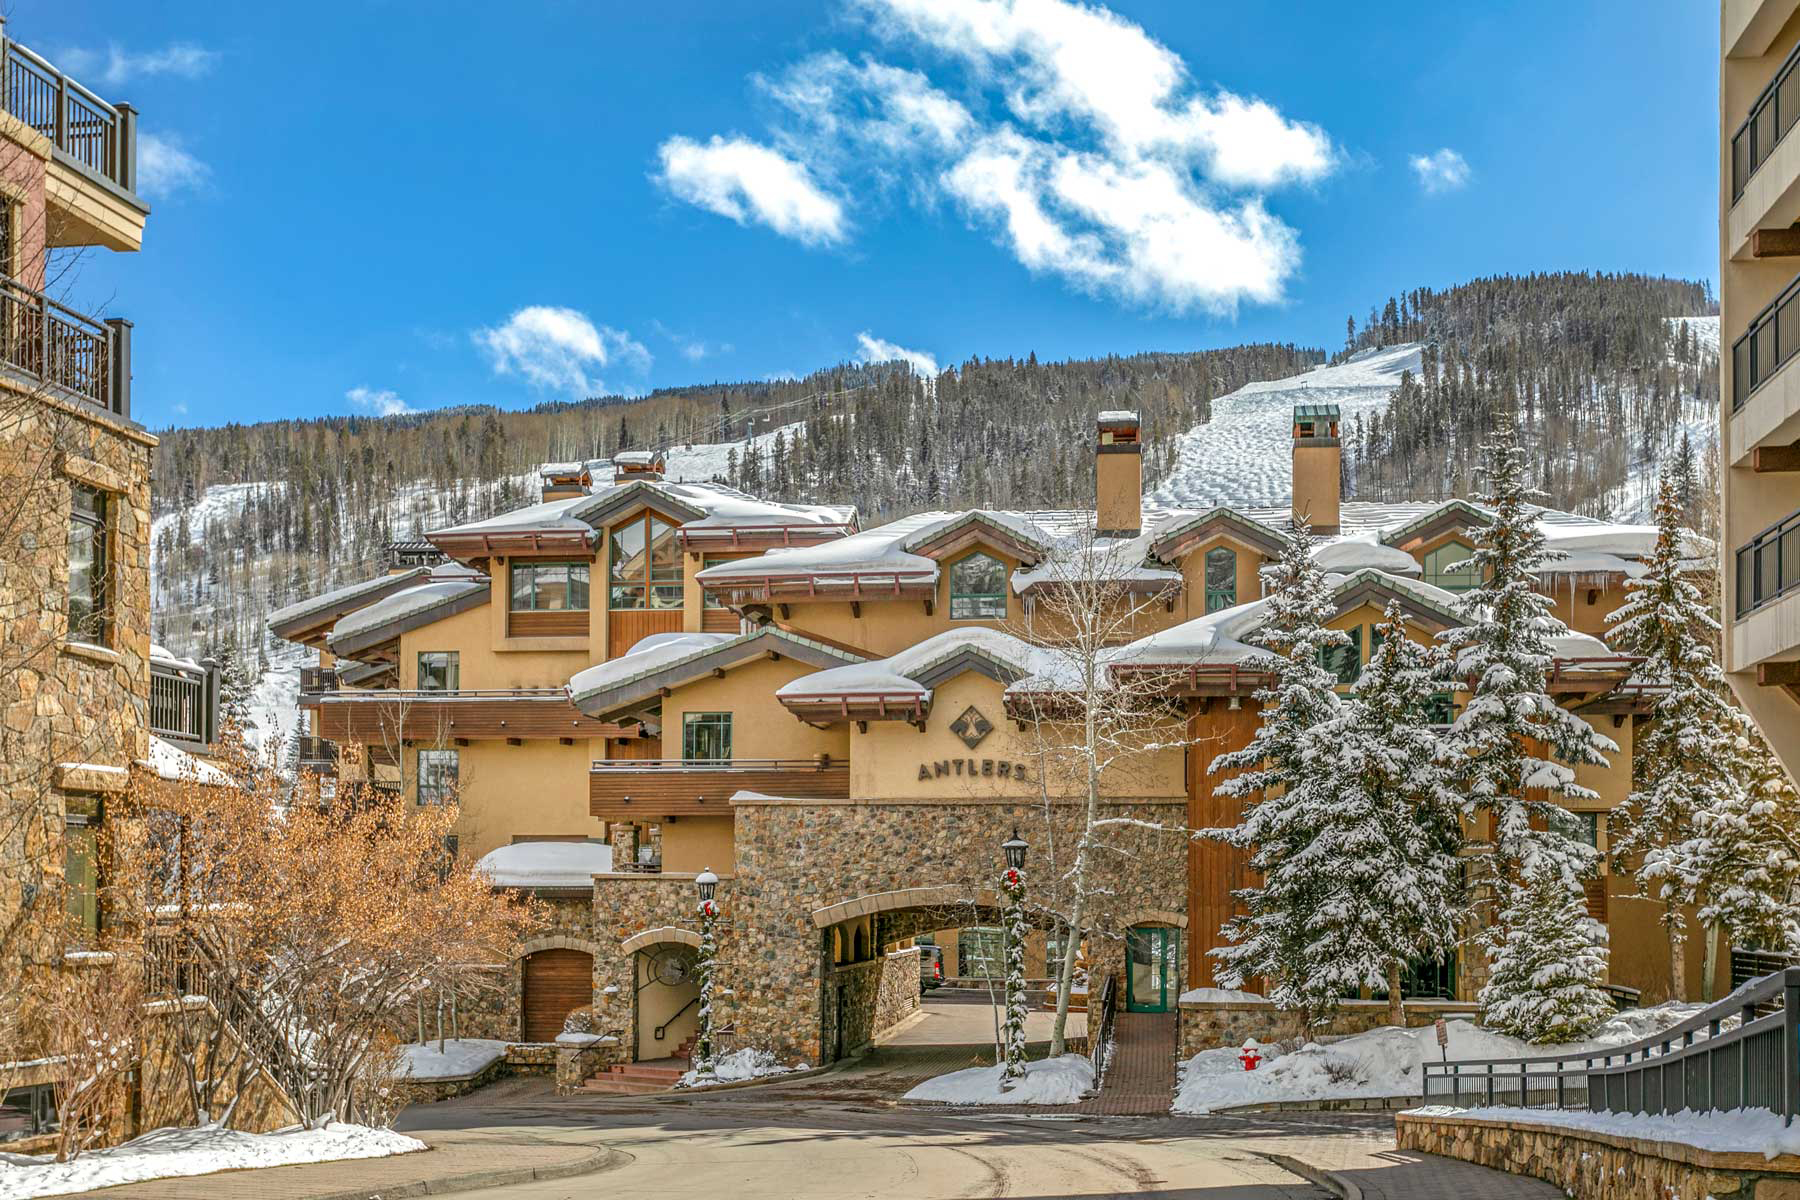 Antlers at Vail Hotel Celebrates 50 Years of Amenities-packed Colorado ...